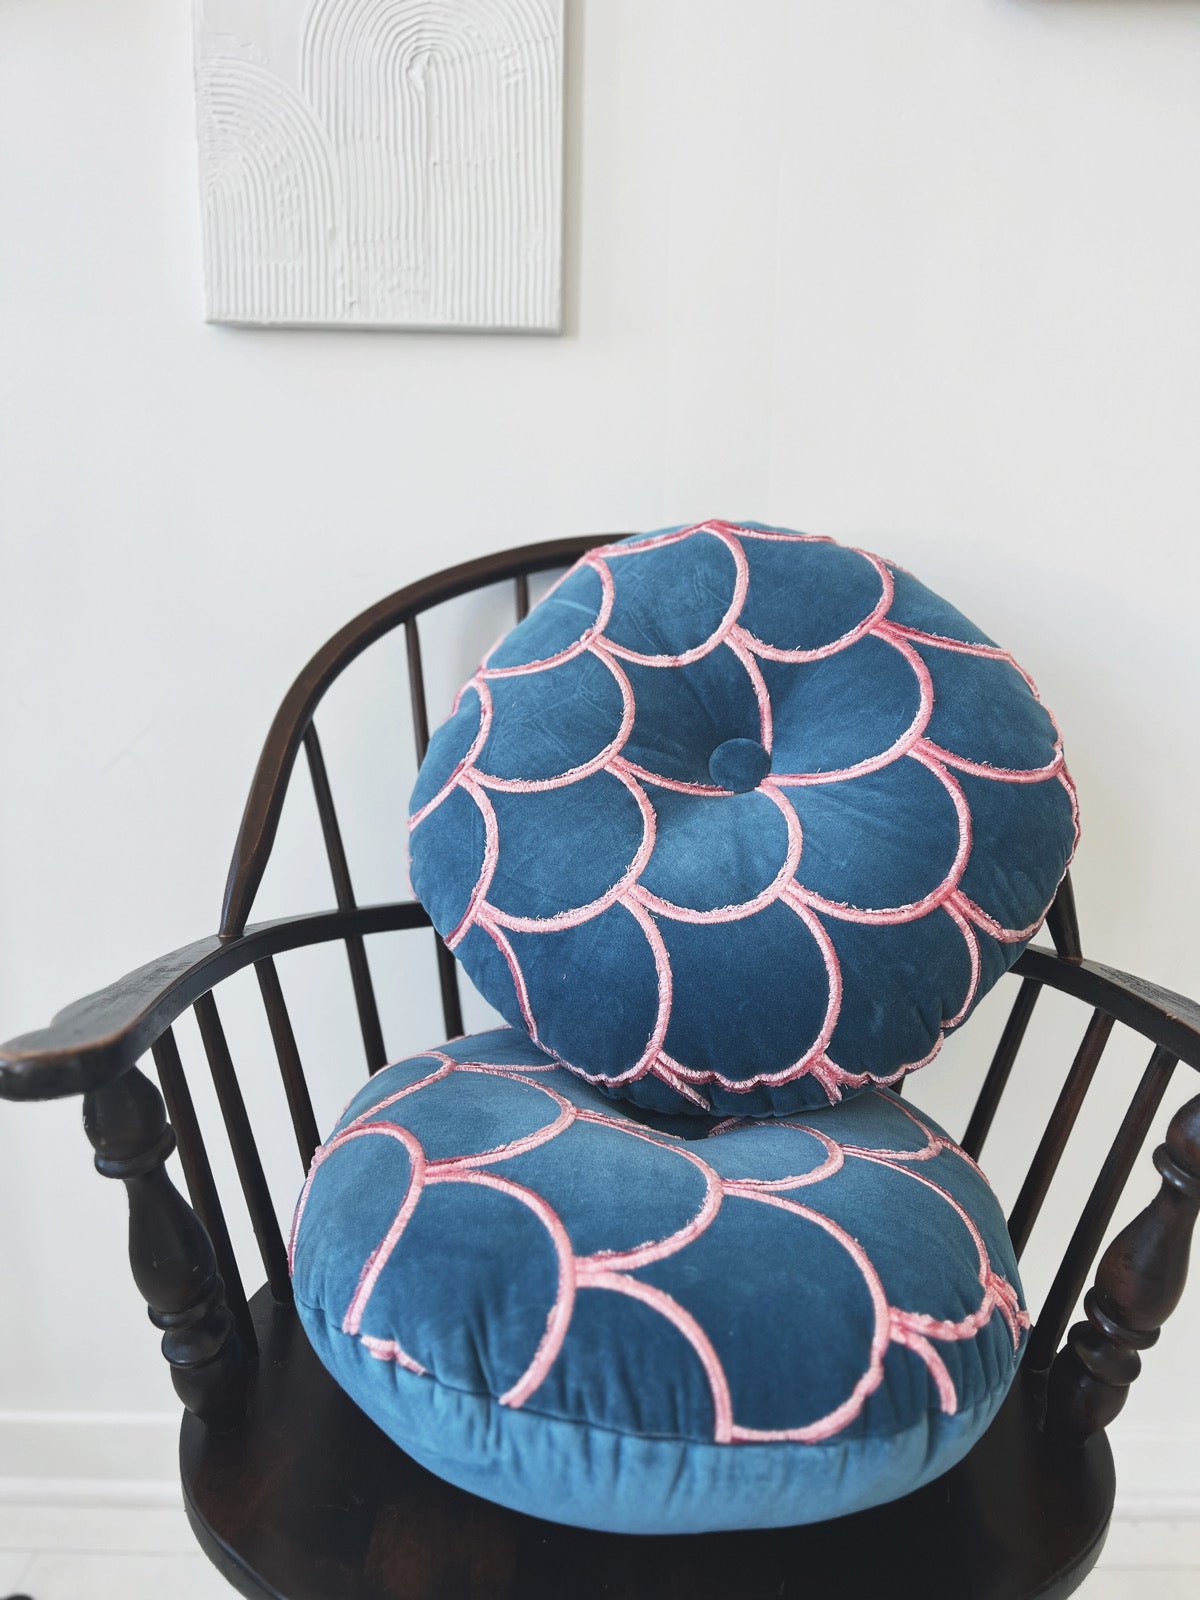 Tufted Scallop Round Pillow - Spring Sweet